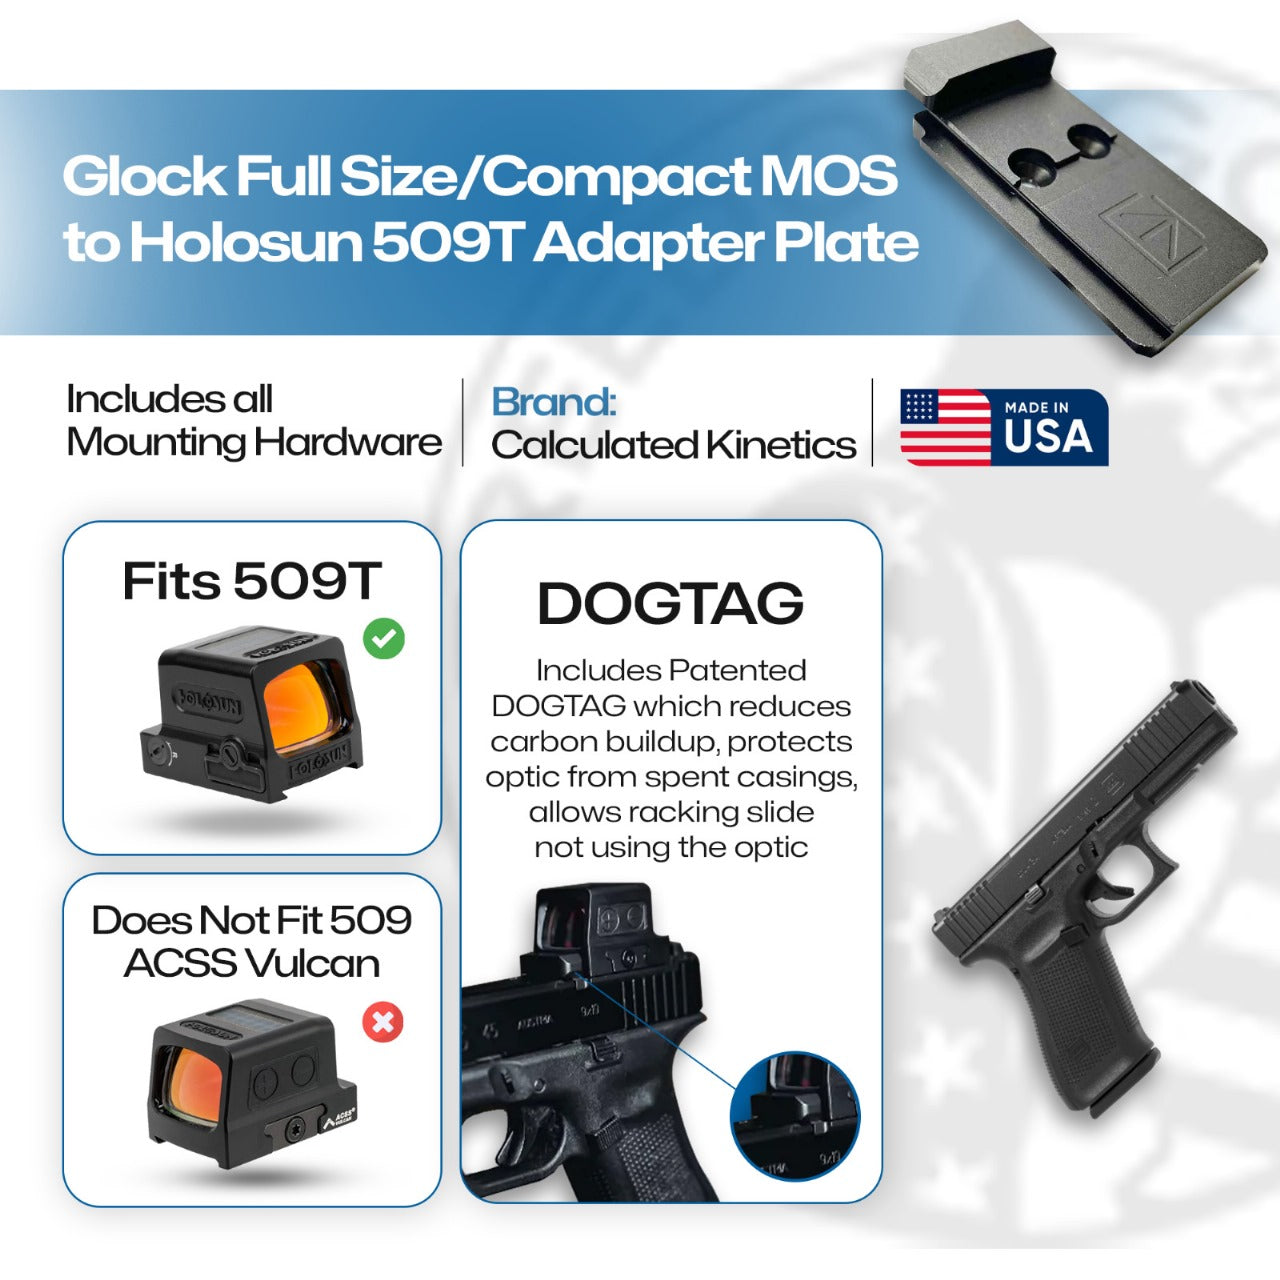 Glock MOS Full Size/Compact to Holosun 509T Adapter Plate - DOGTAG - Aluminum - Calculated Kinetics - (Does not fit 10MM)